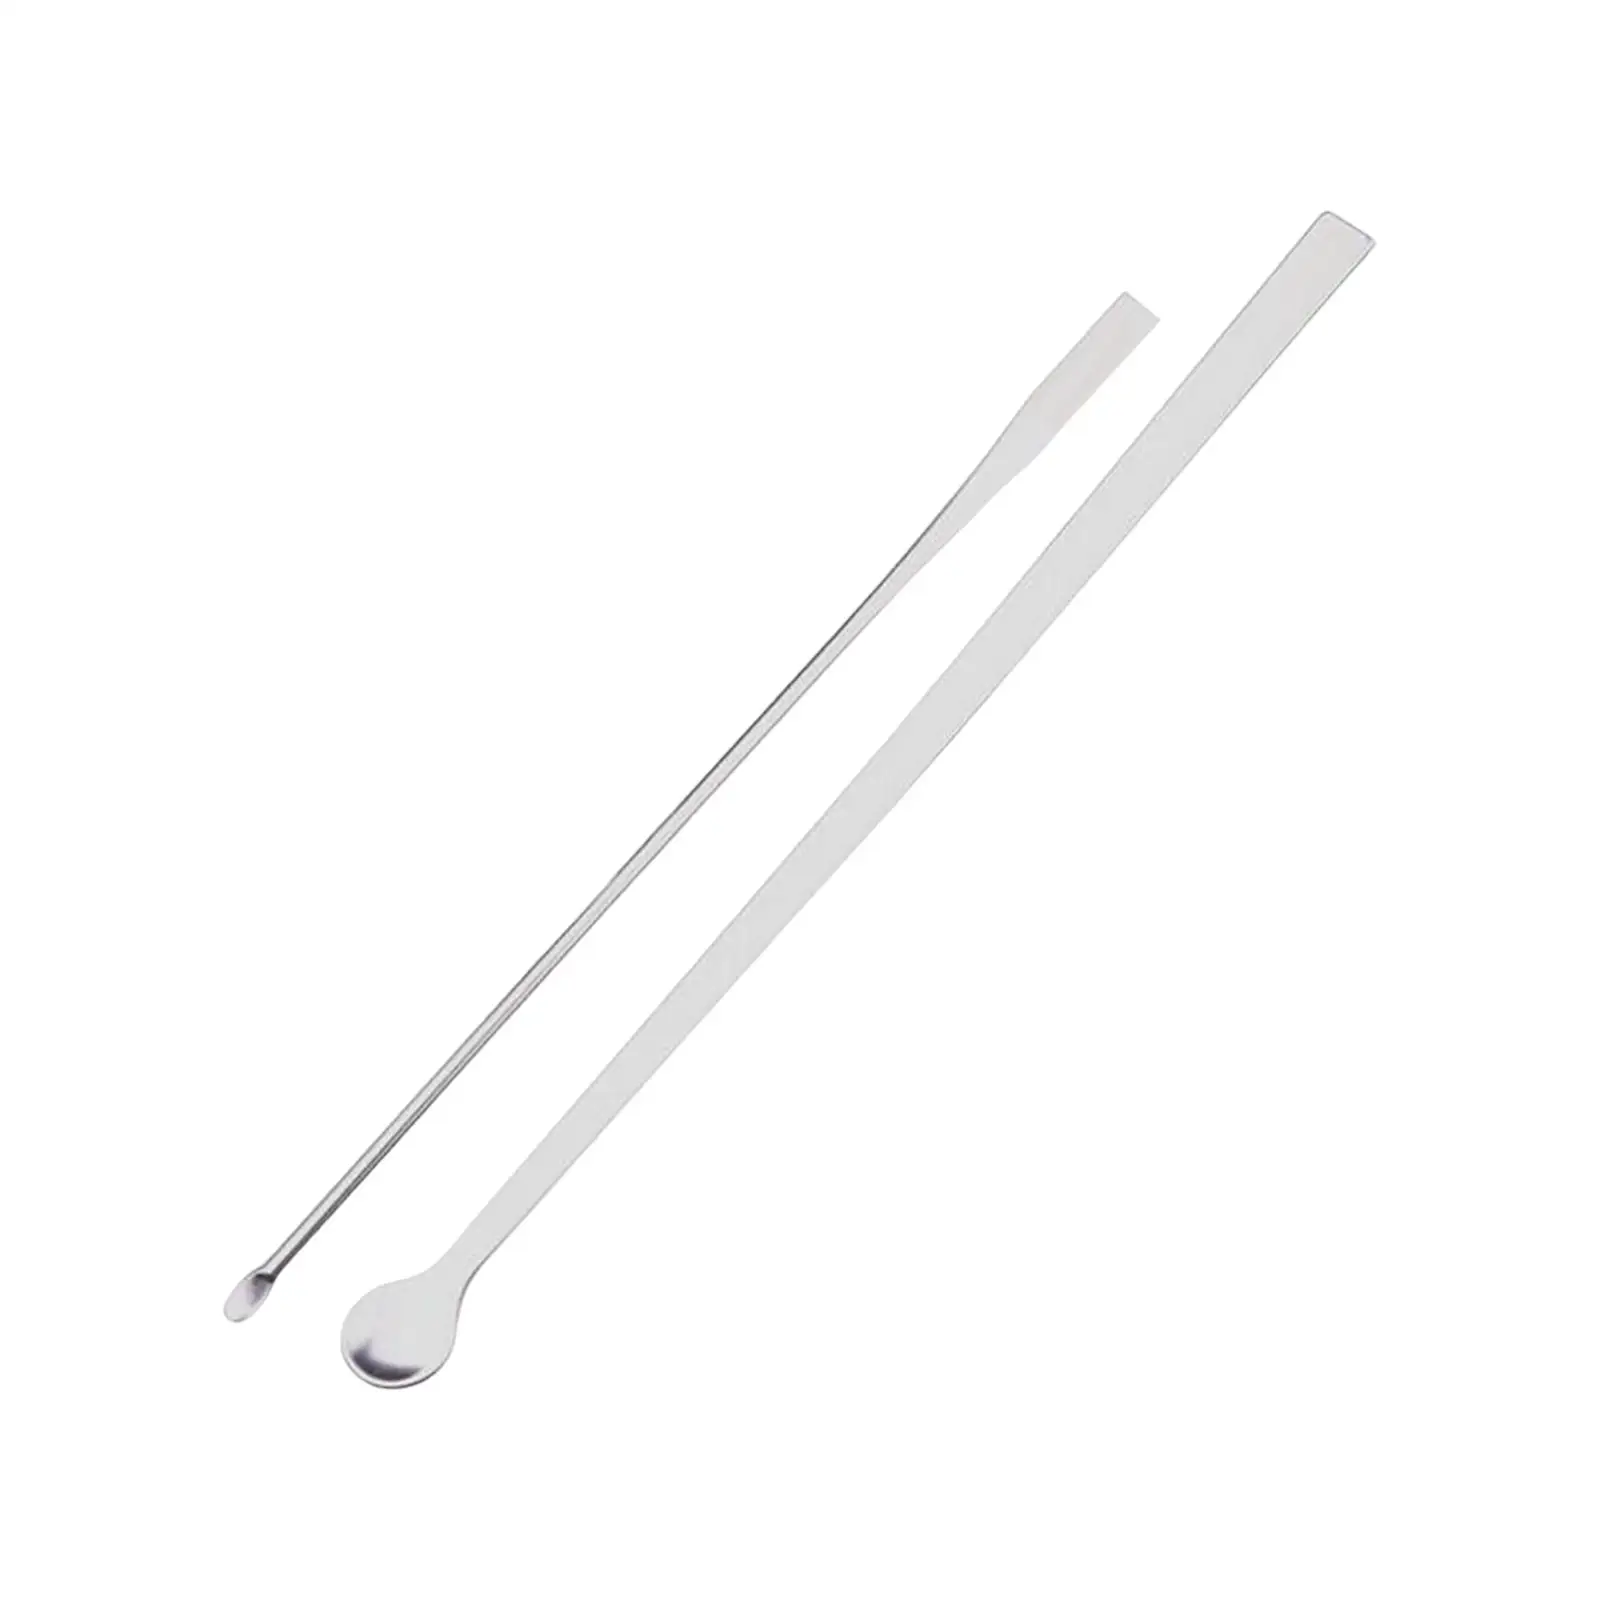 2x Modeling Paint Stirrer 14cm Length Crafts Tools Portable for Accessories